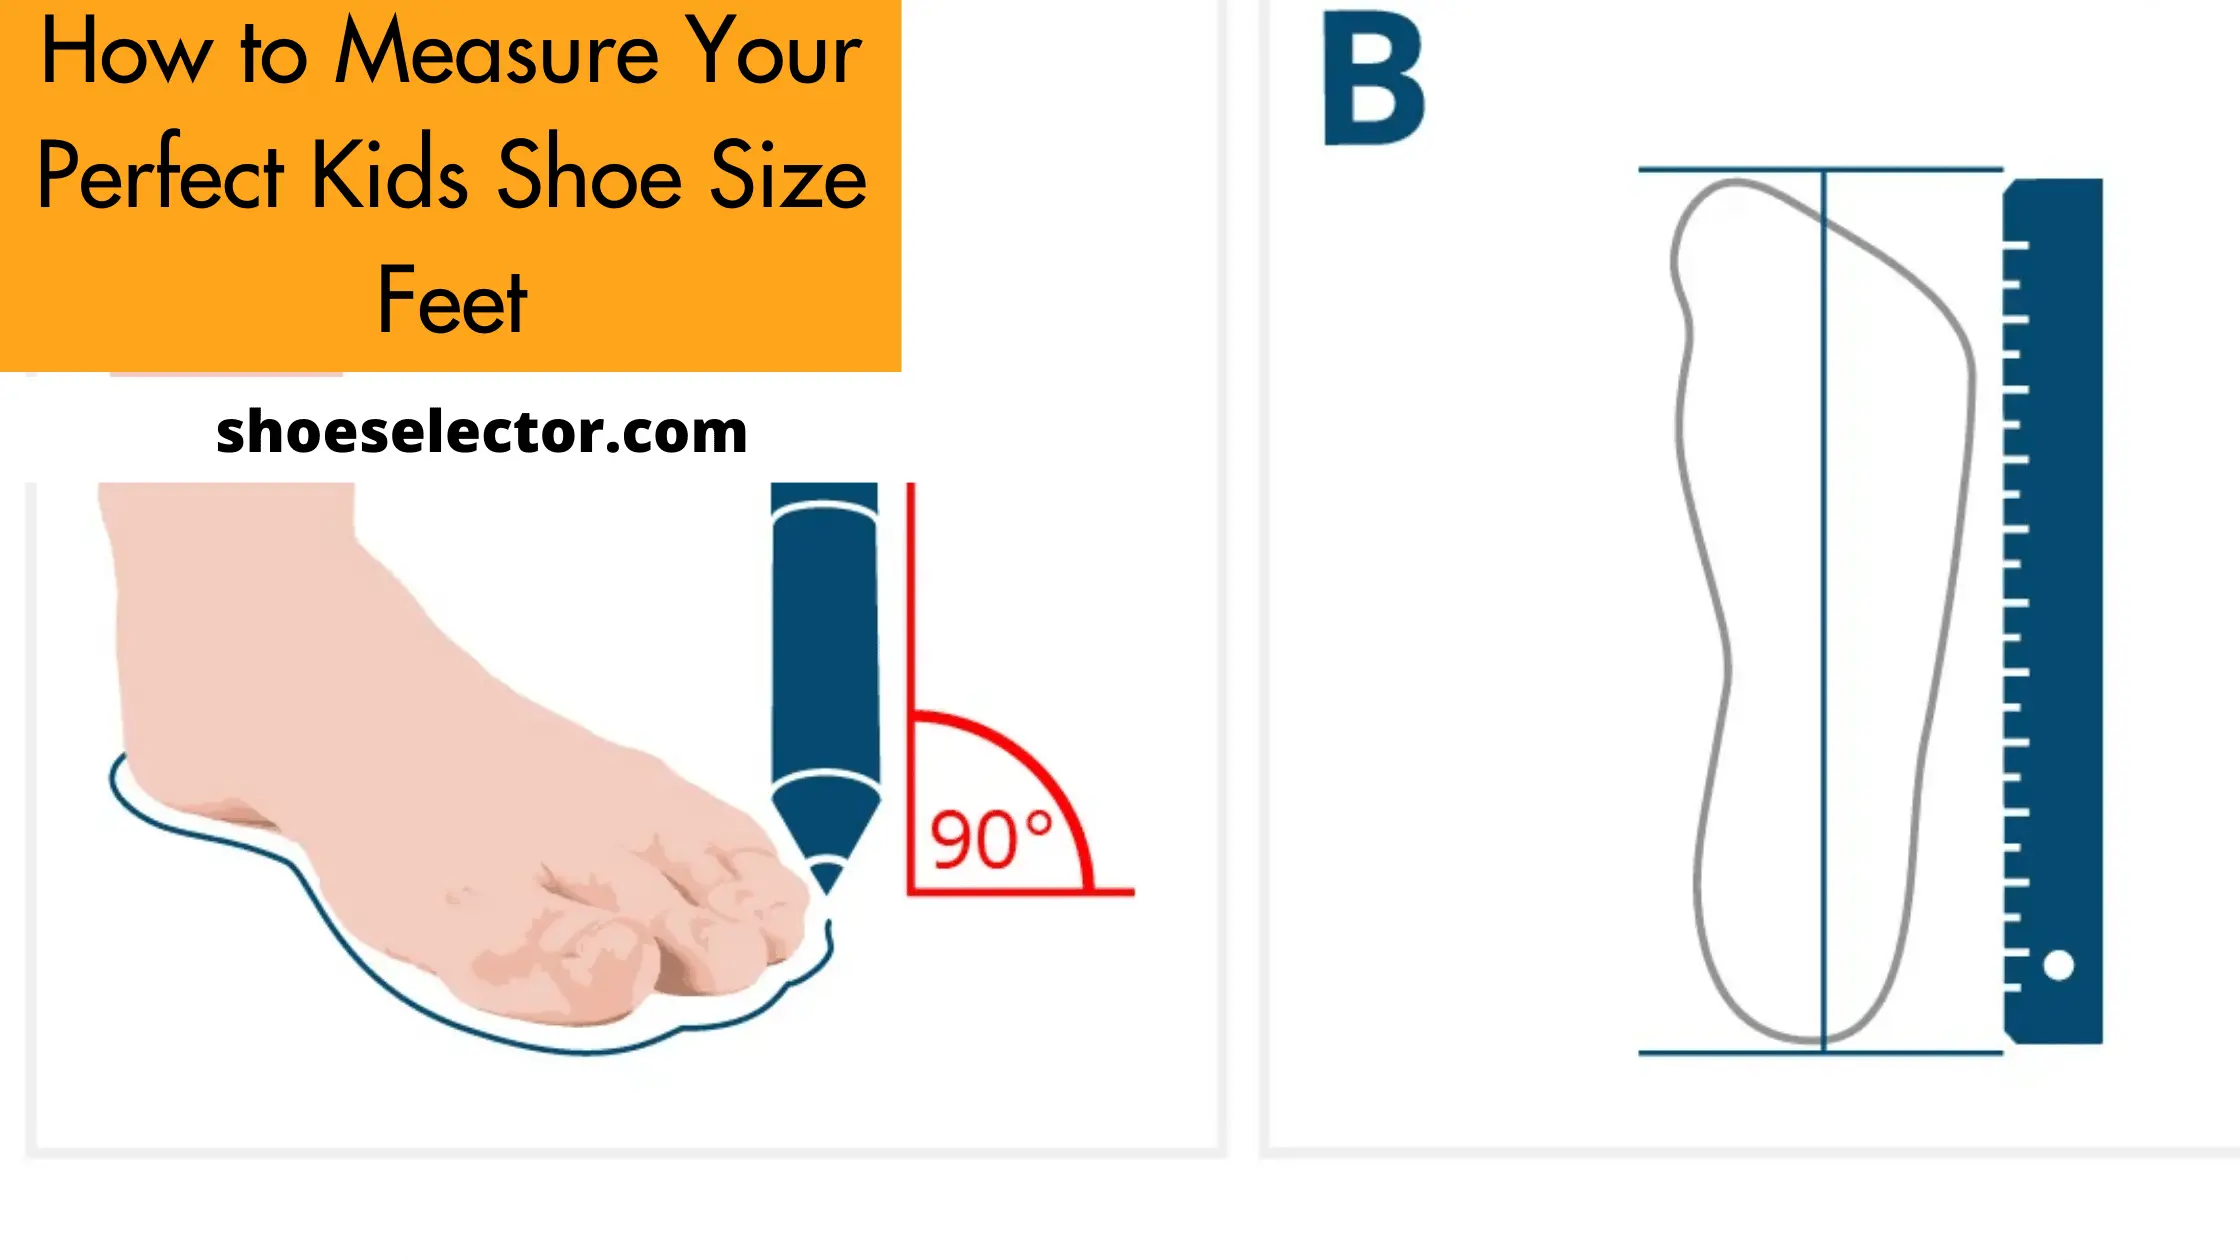 How to Measure Your Perfect Kids Shoe Size Feet?